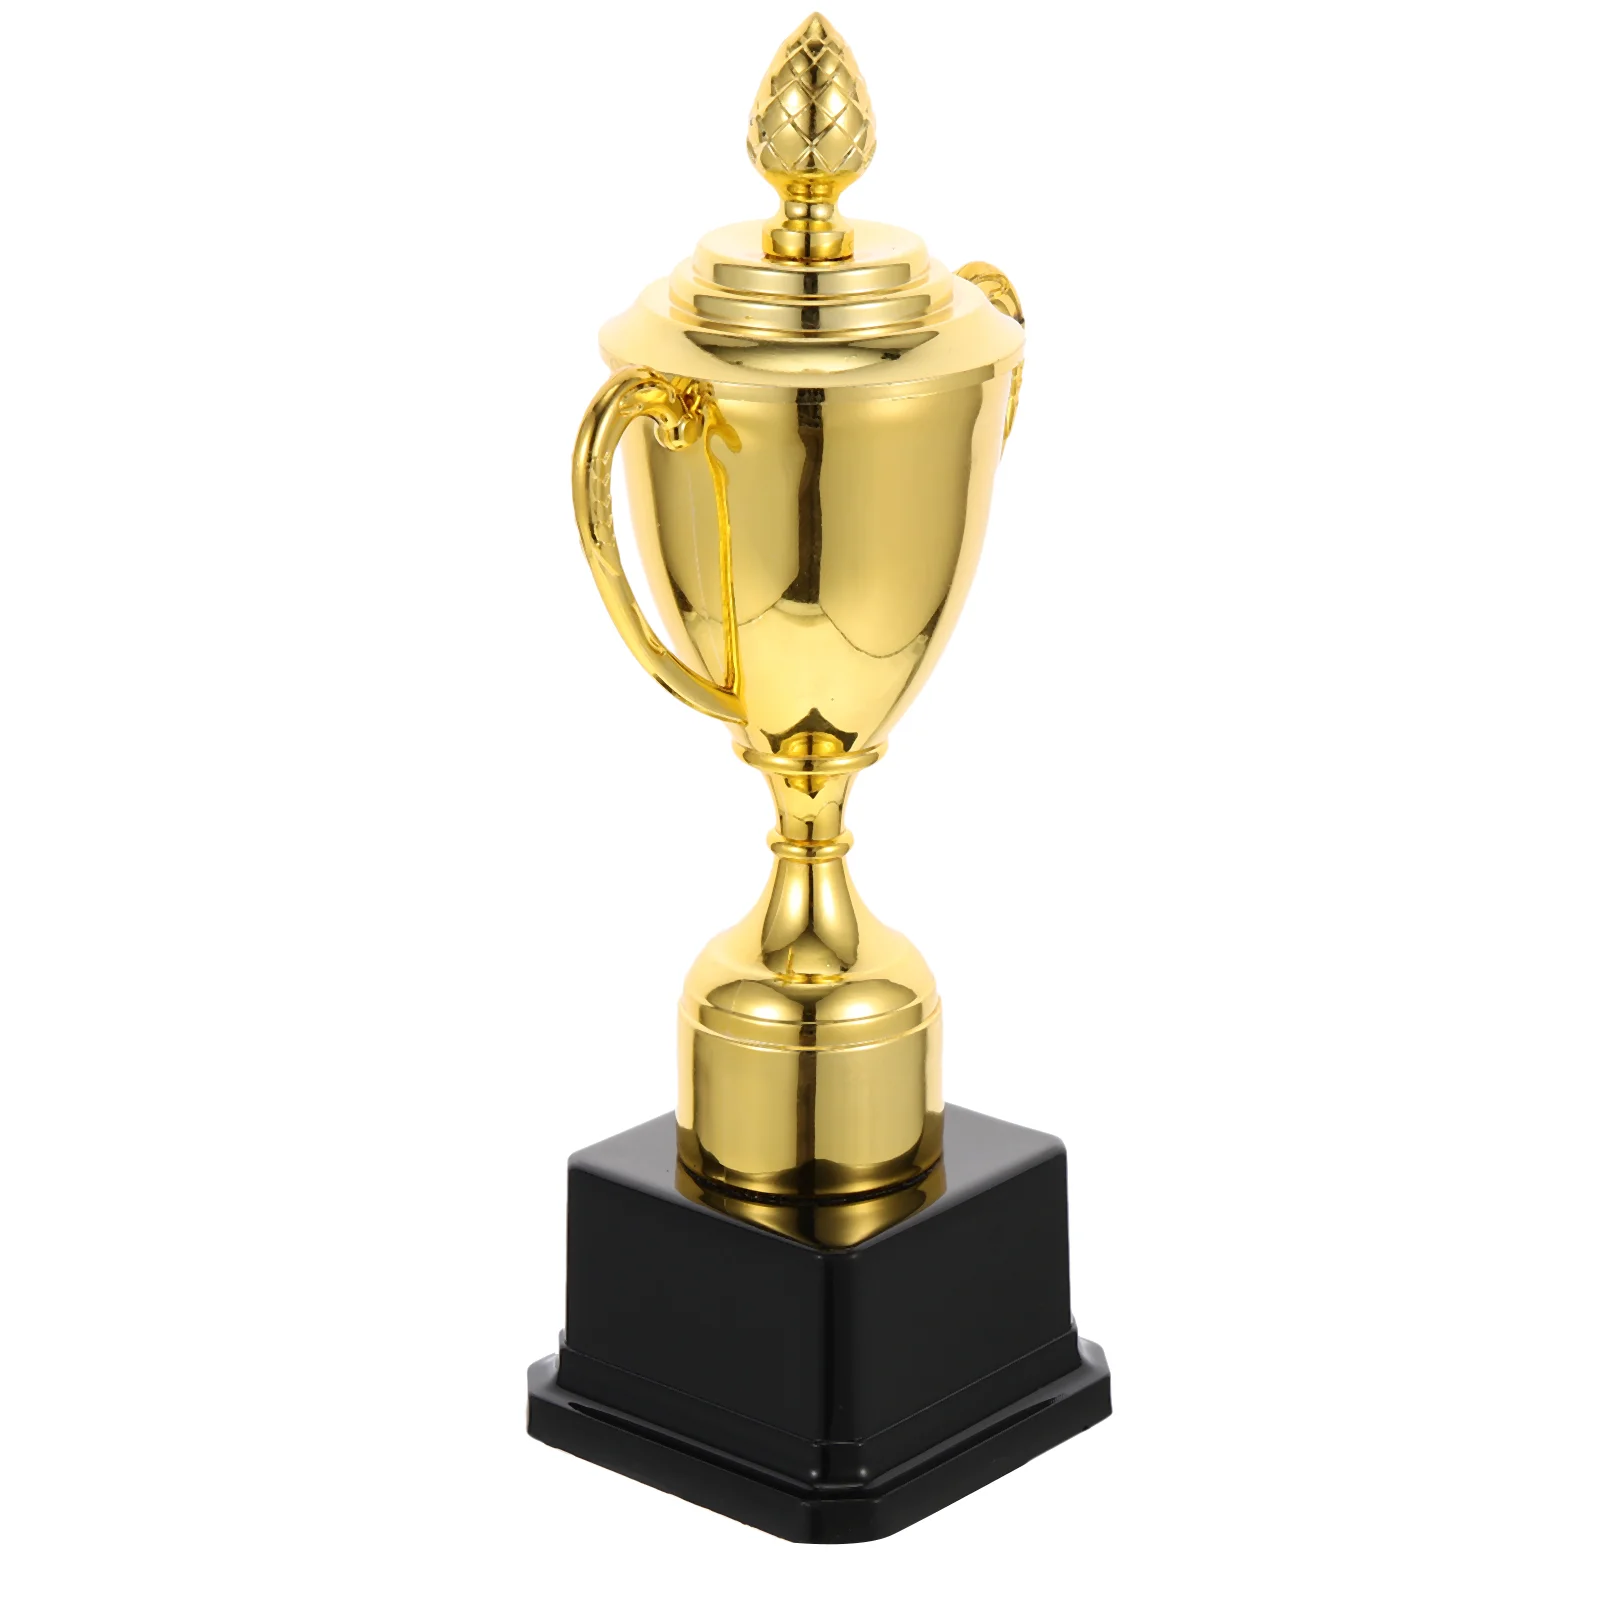 

Trophy Cup Award Trophies Gold Mini Winner Awards Kids Competition Prizeparty Trophys Golden Cups Rewardgamedecorative Football